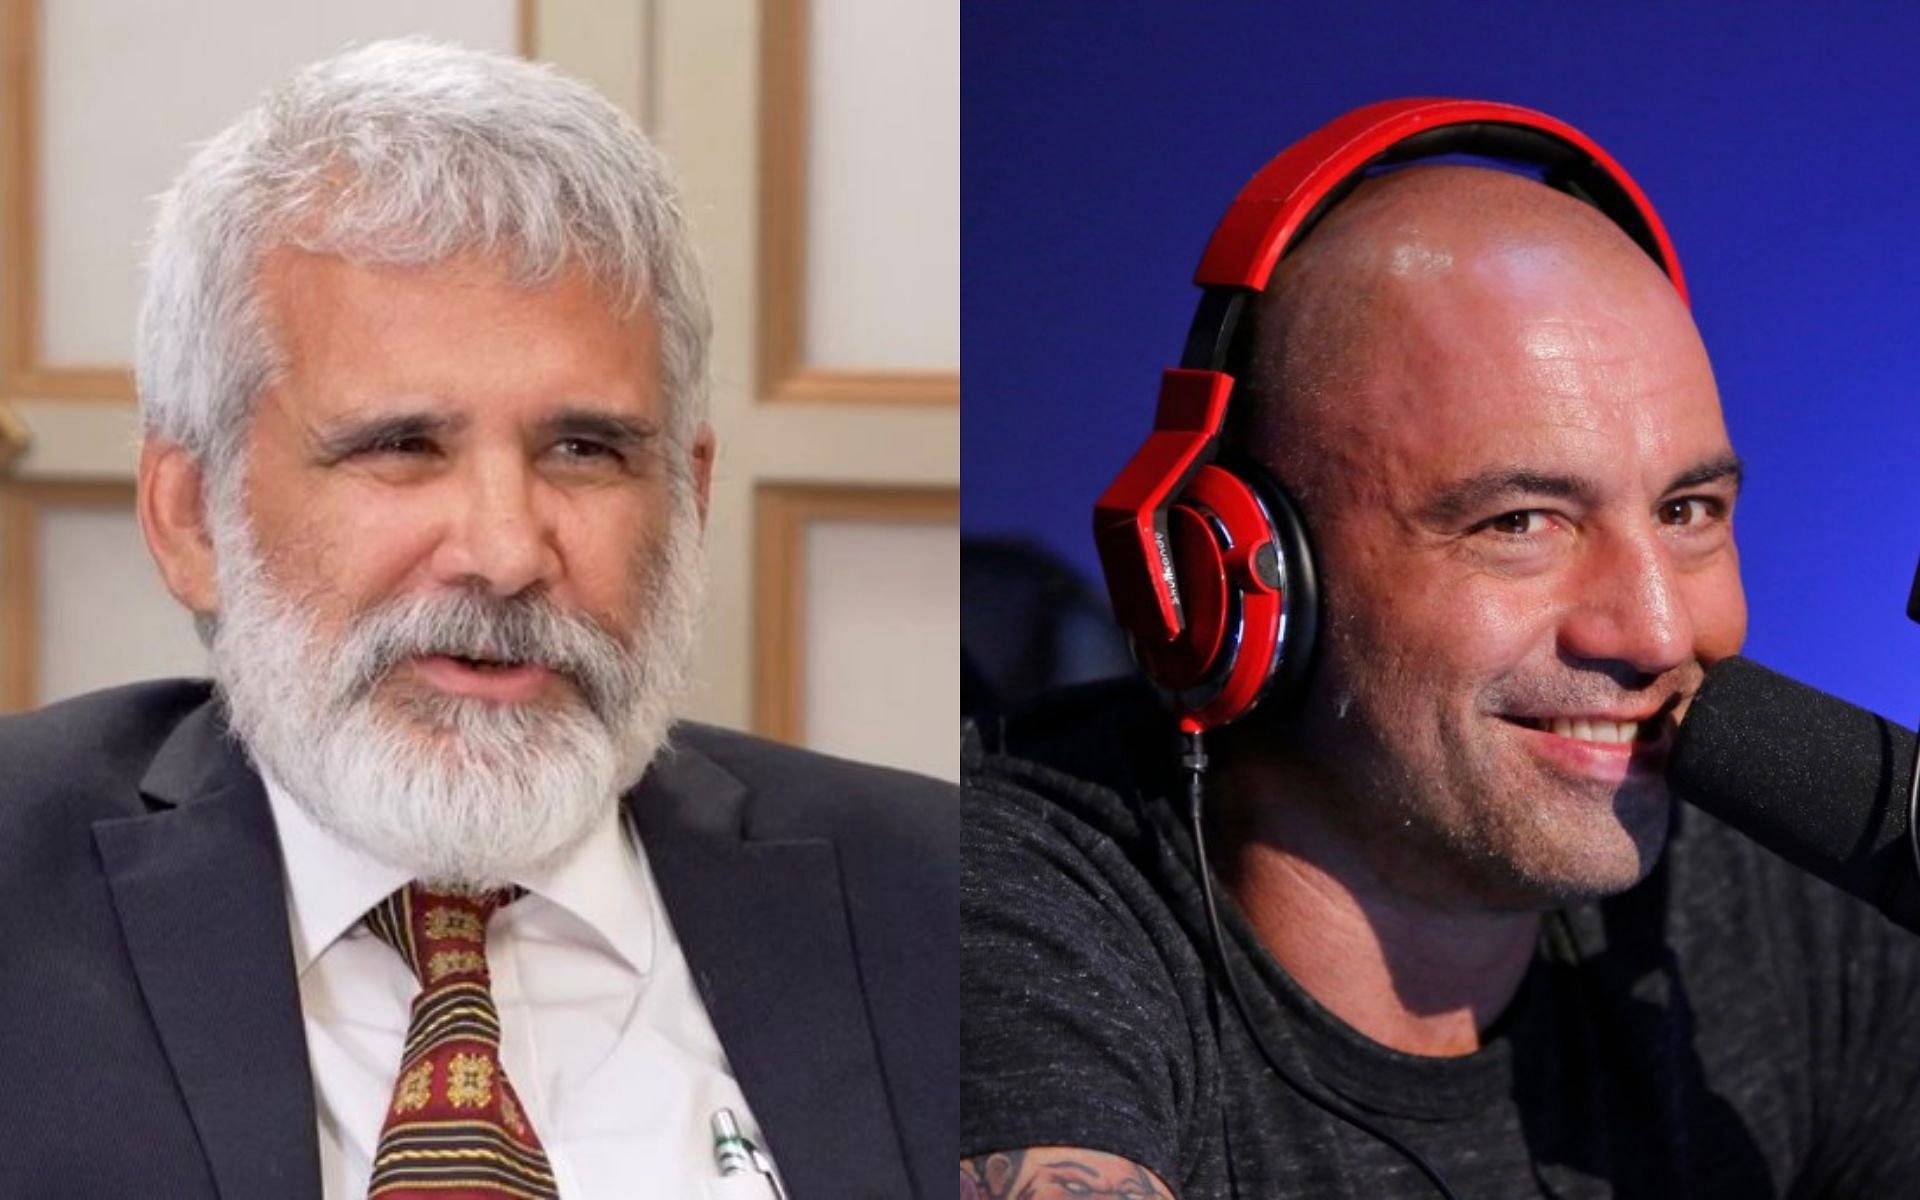 Dr. Robert Malone (left) and Joe Rogan (right) [Image Courtesy: @GETTRofficial and @nypost on Twitter]